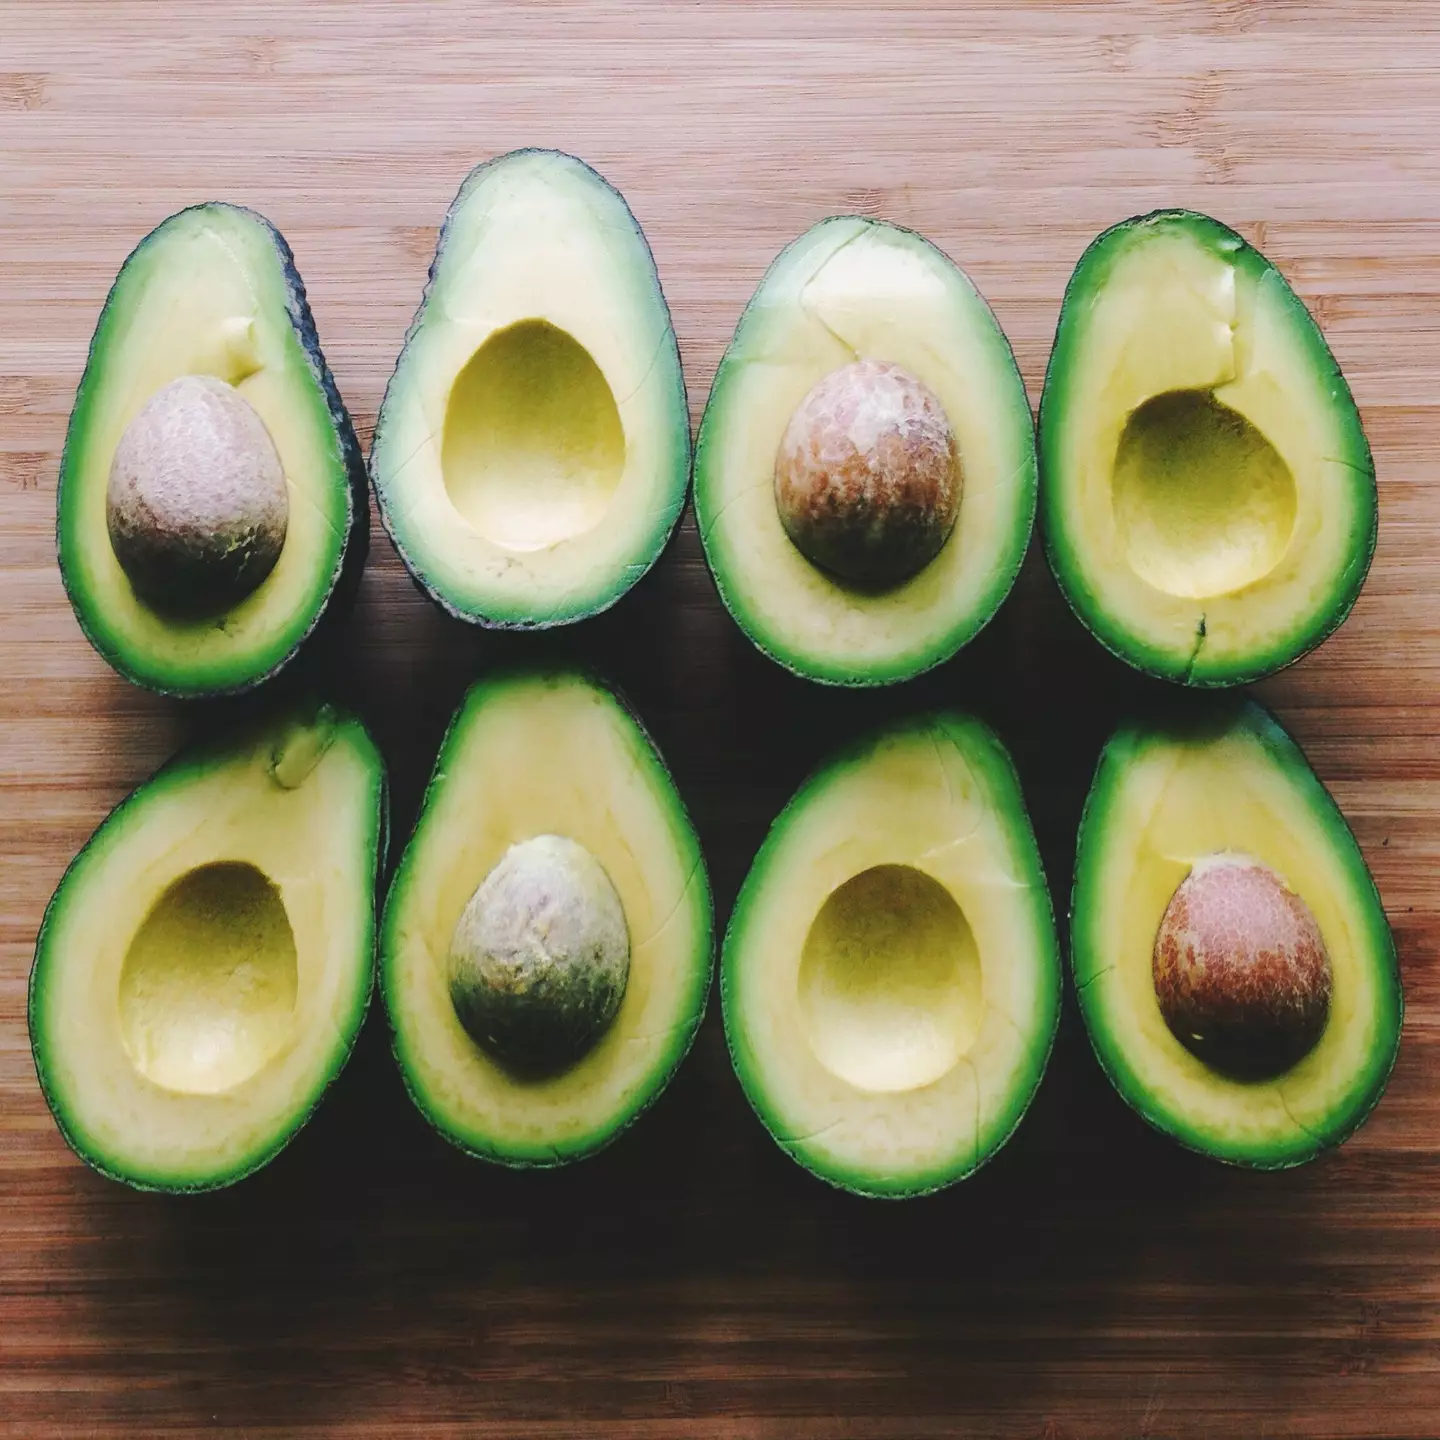 Others shared their own avocado hacks (